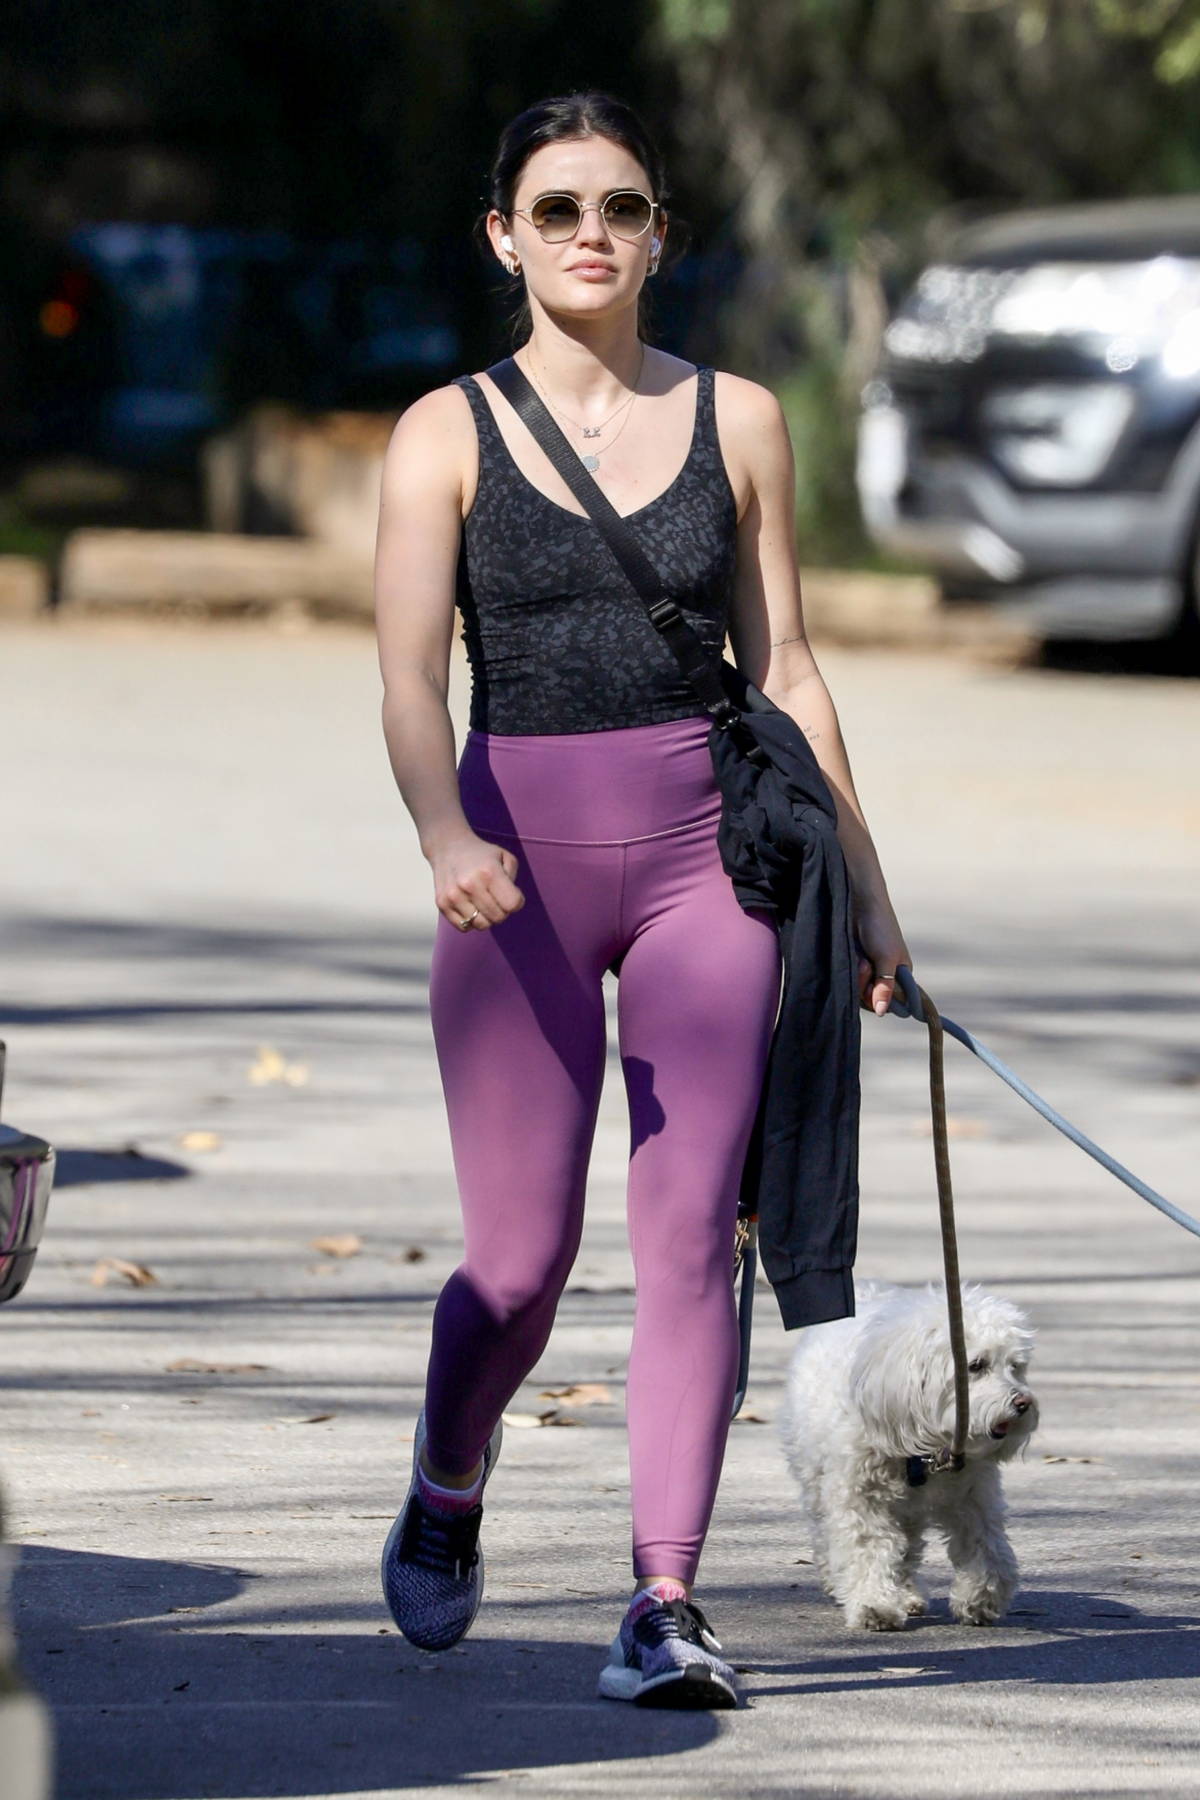 Lucy Hale displays her athletic figure in patterned tank top and leggings  while attending a hot